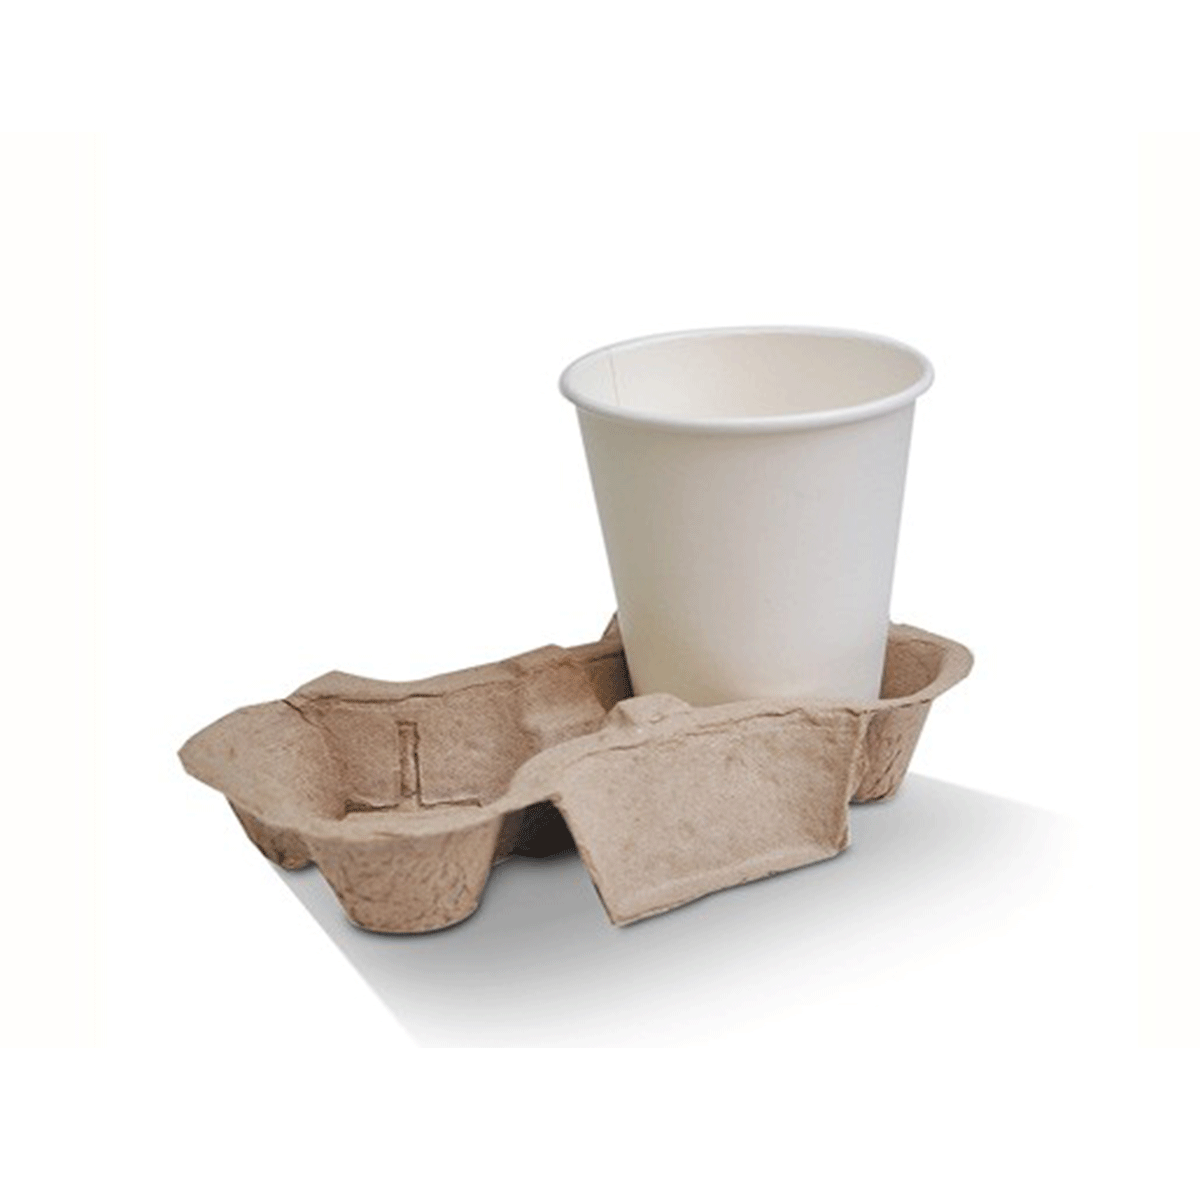 2 Cup Egg Board Carry Tray